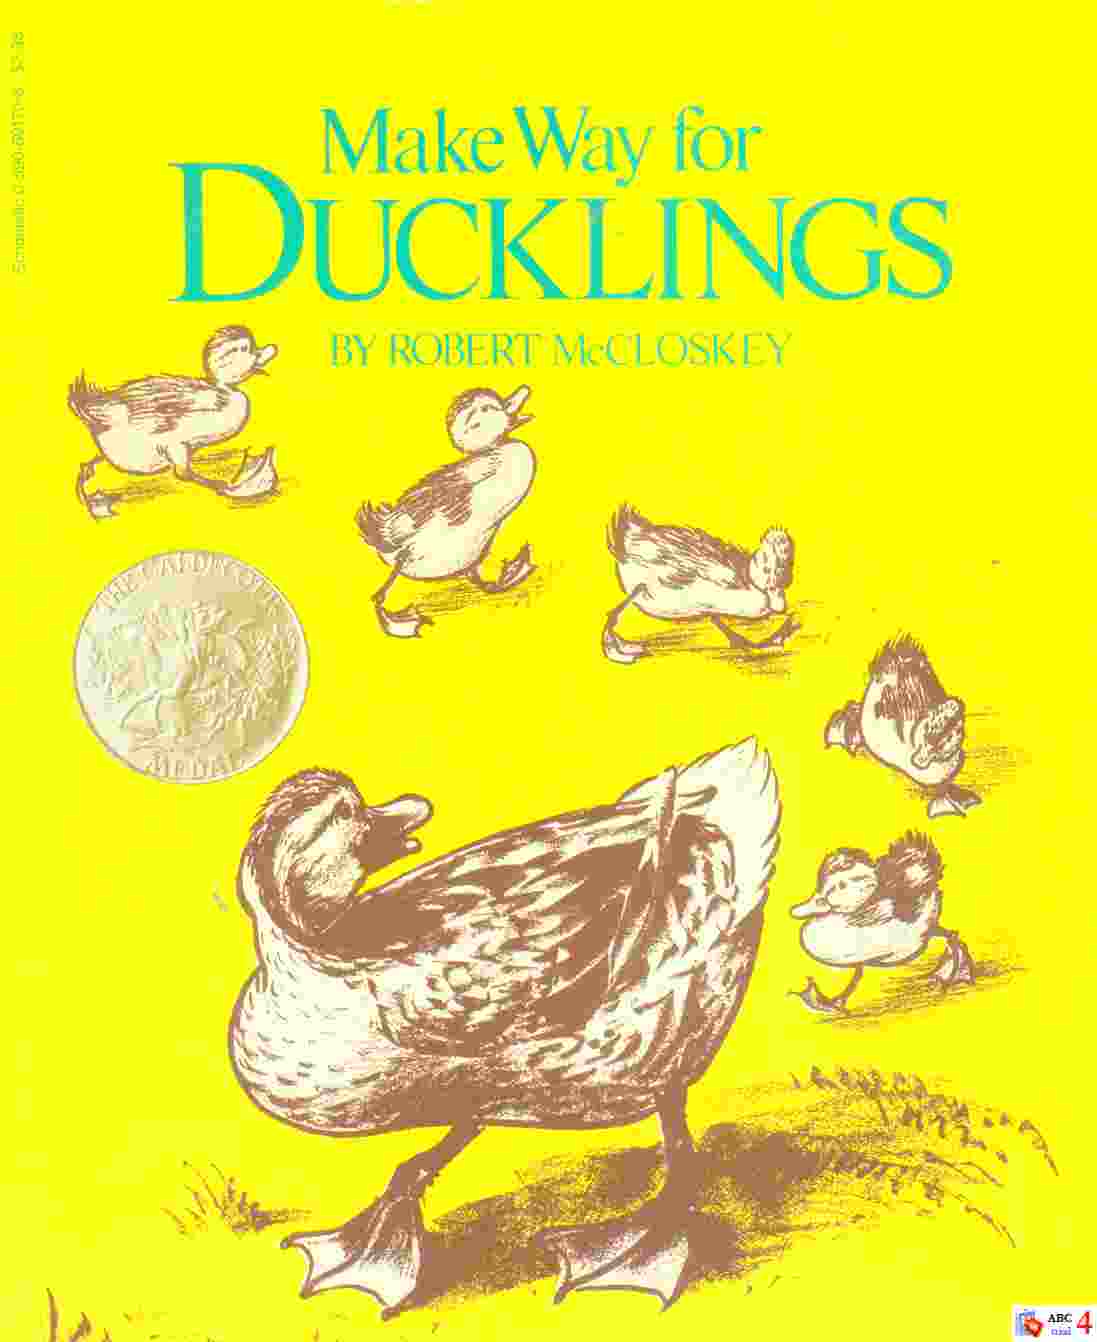 Make way for ducklings 書封